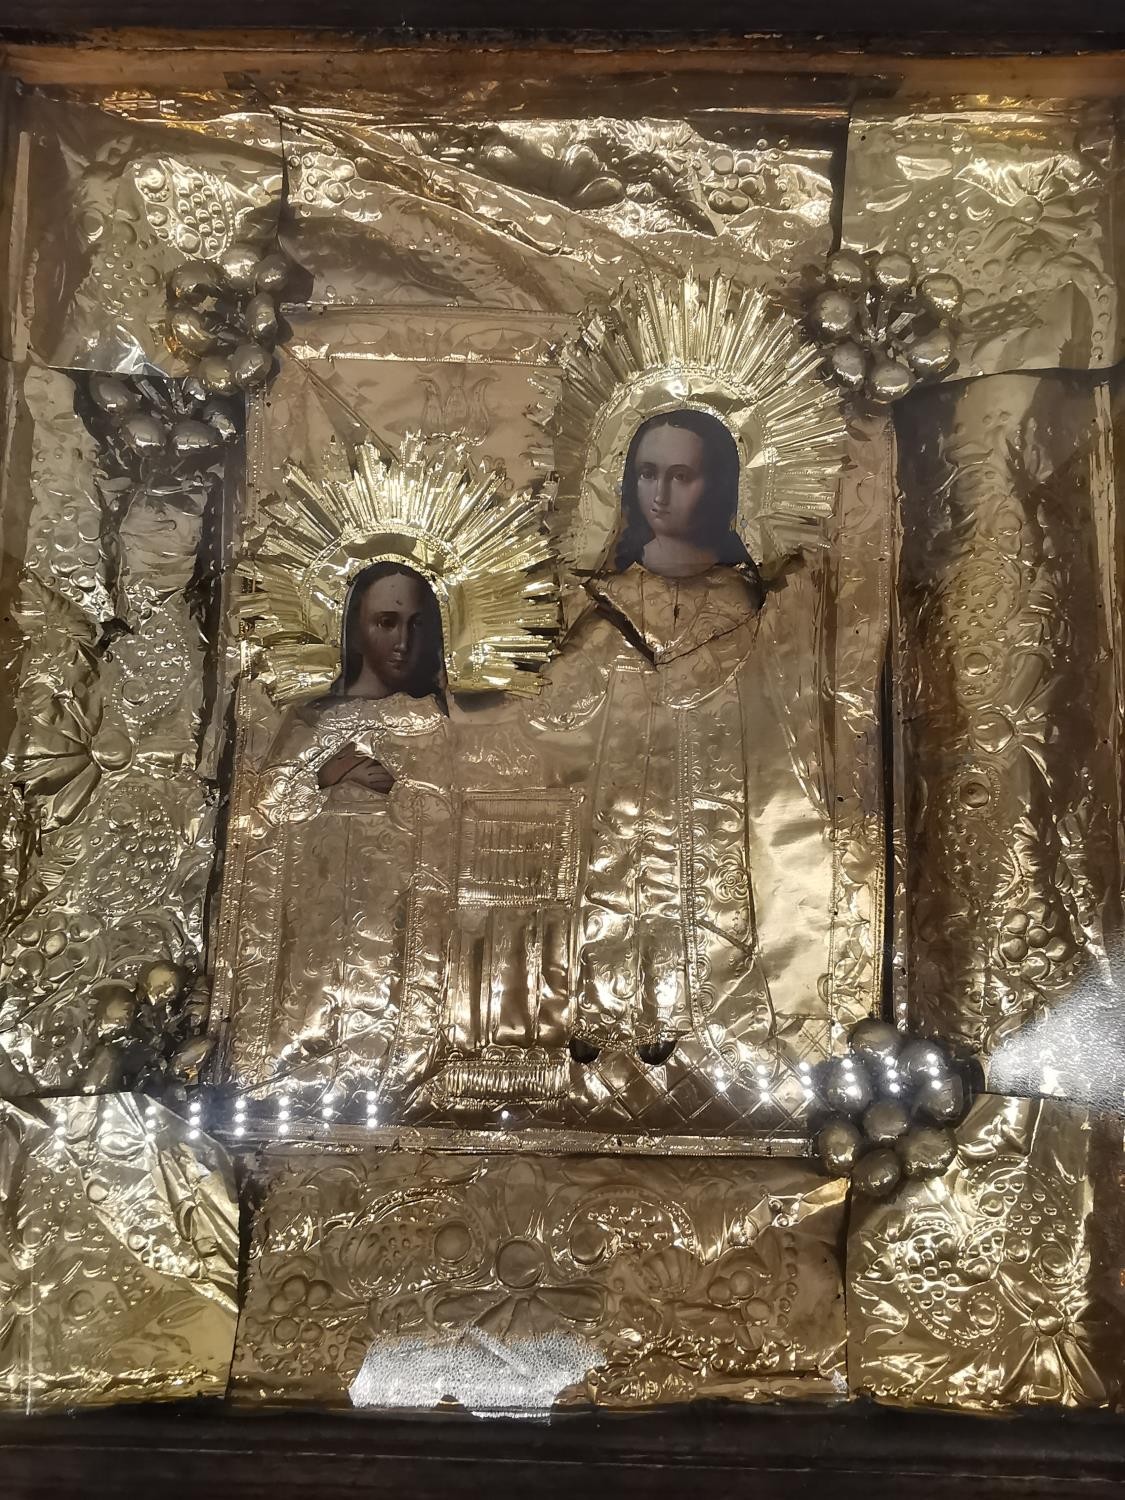 A large 18th/19th century Continental religious icon with Gold metal highly detailed oclad around - Image 12 of 18